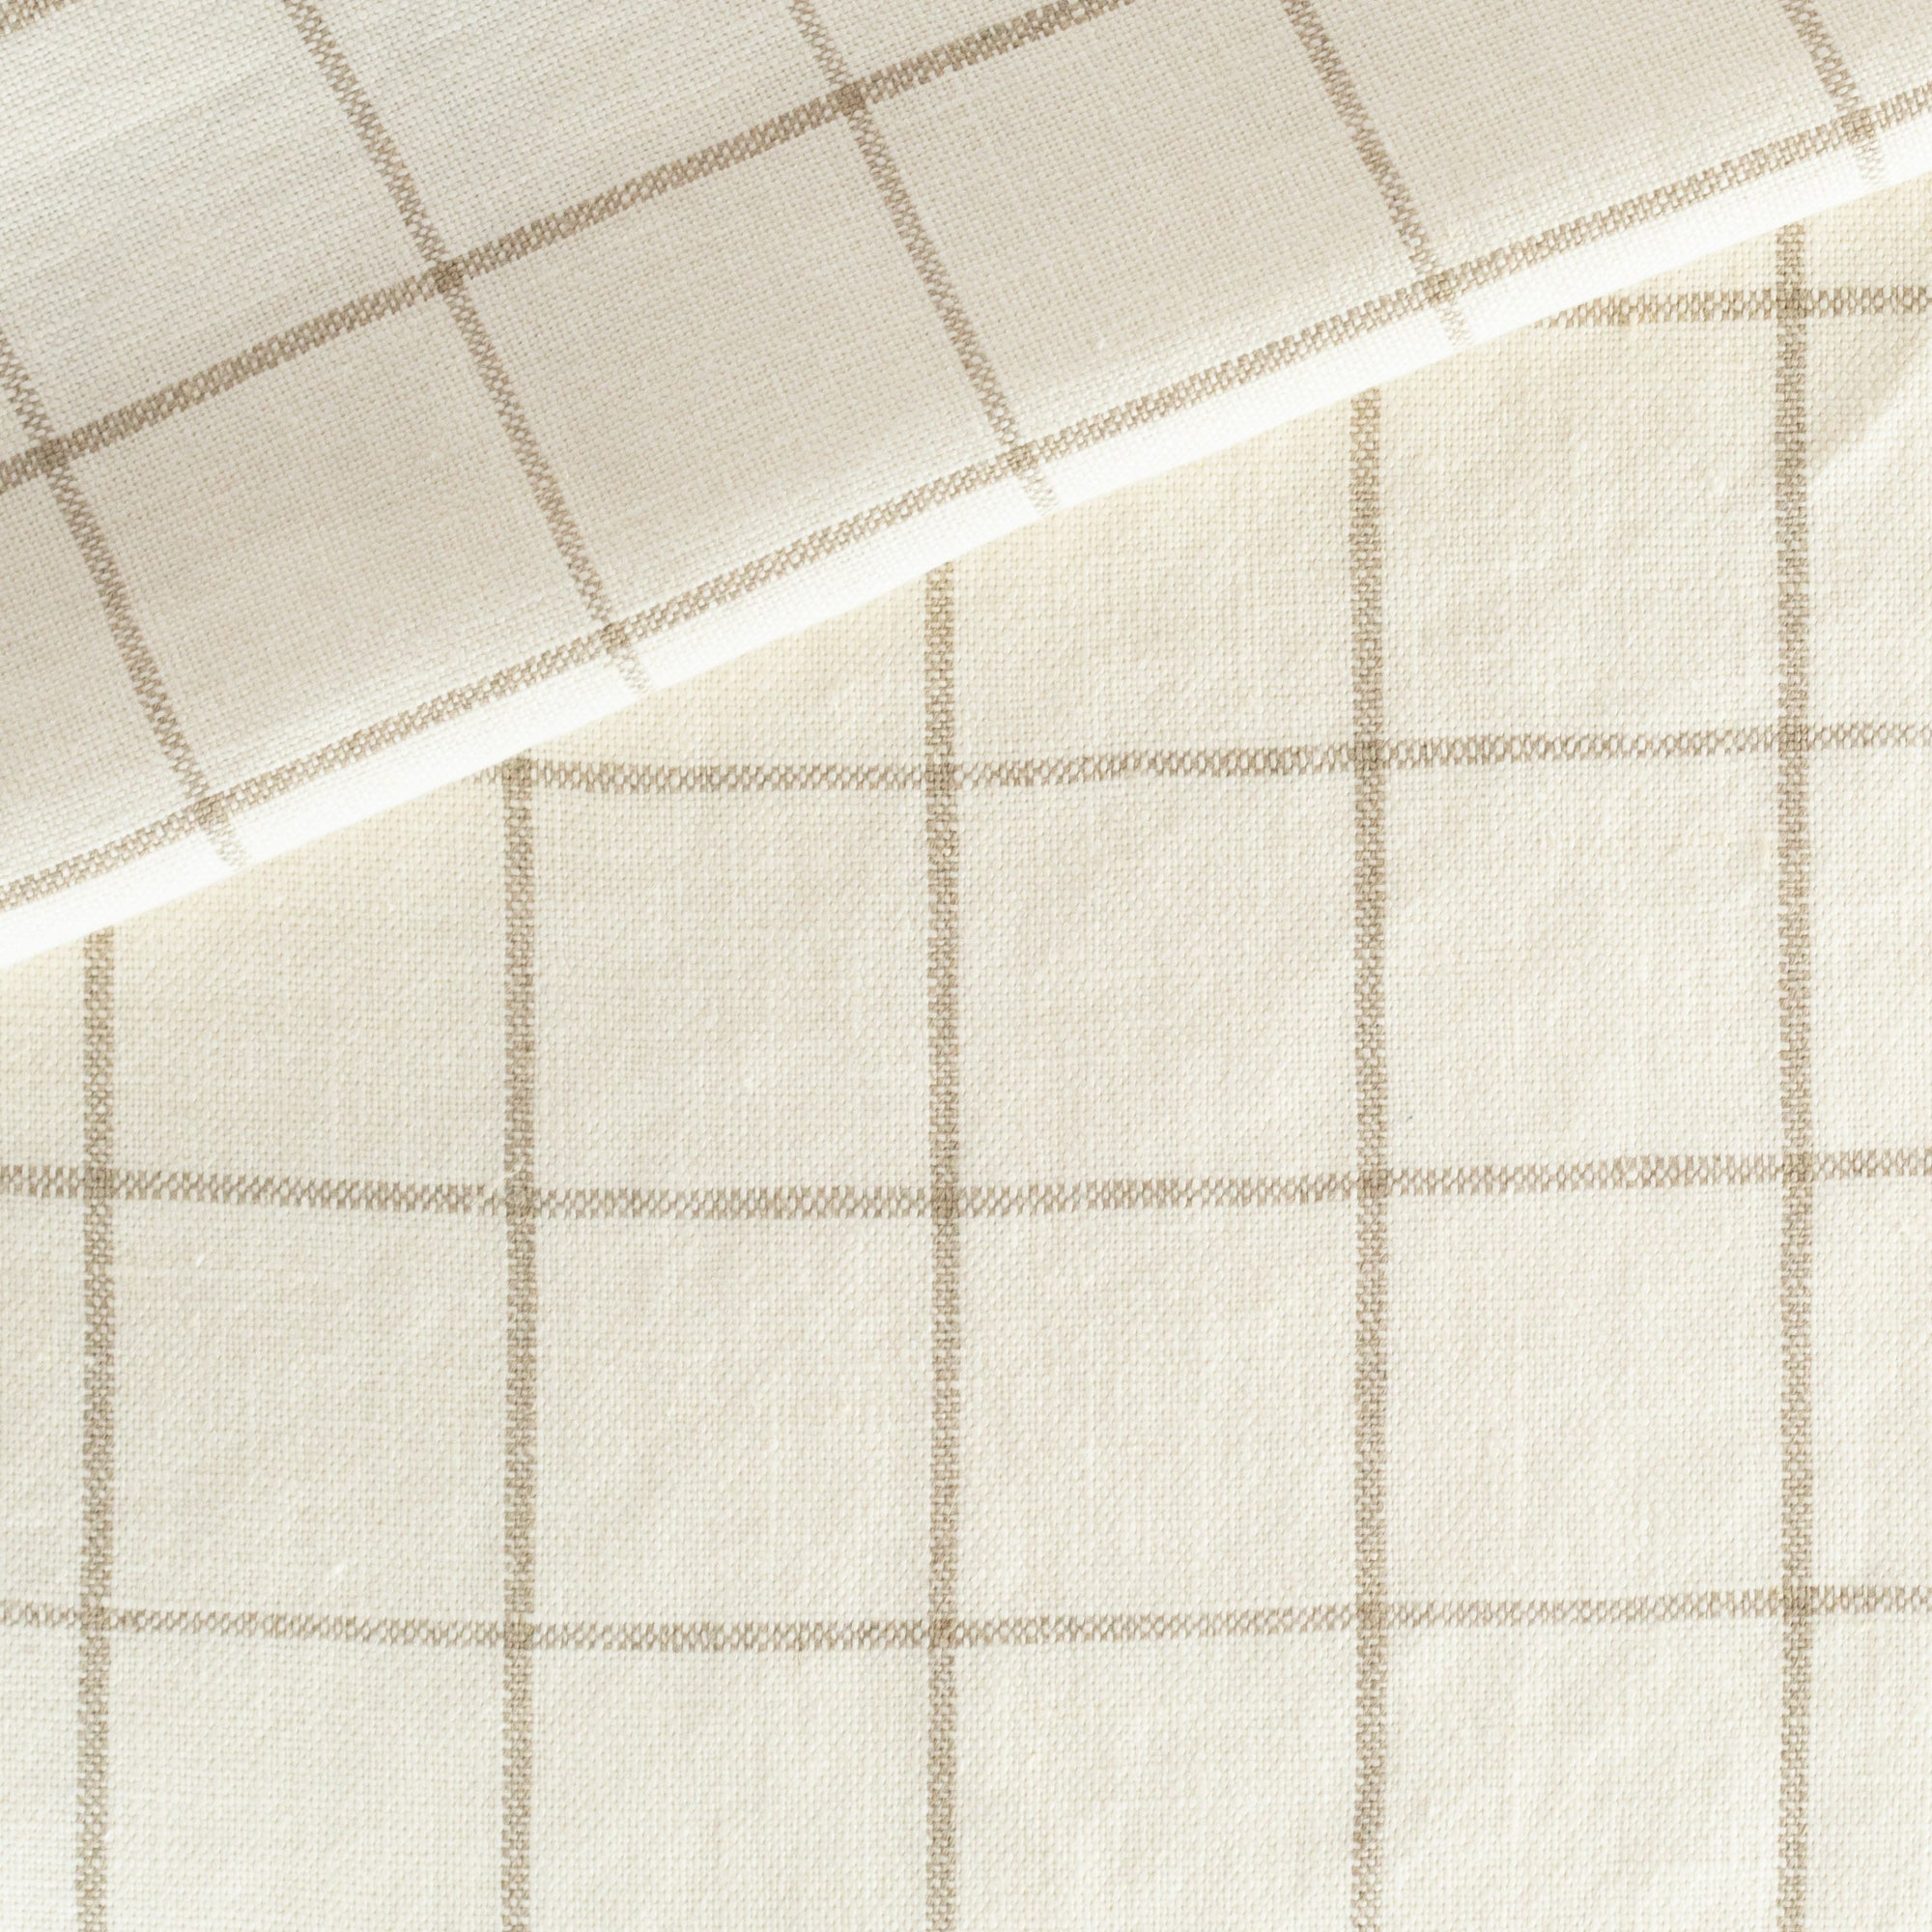 Butler check cream and beige windowpane linen fabric from Tonic Living